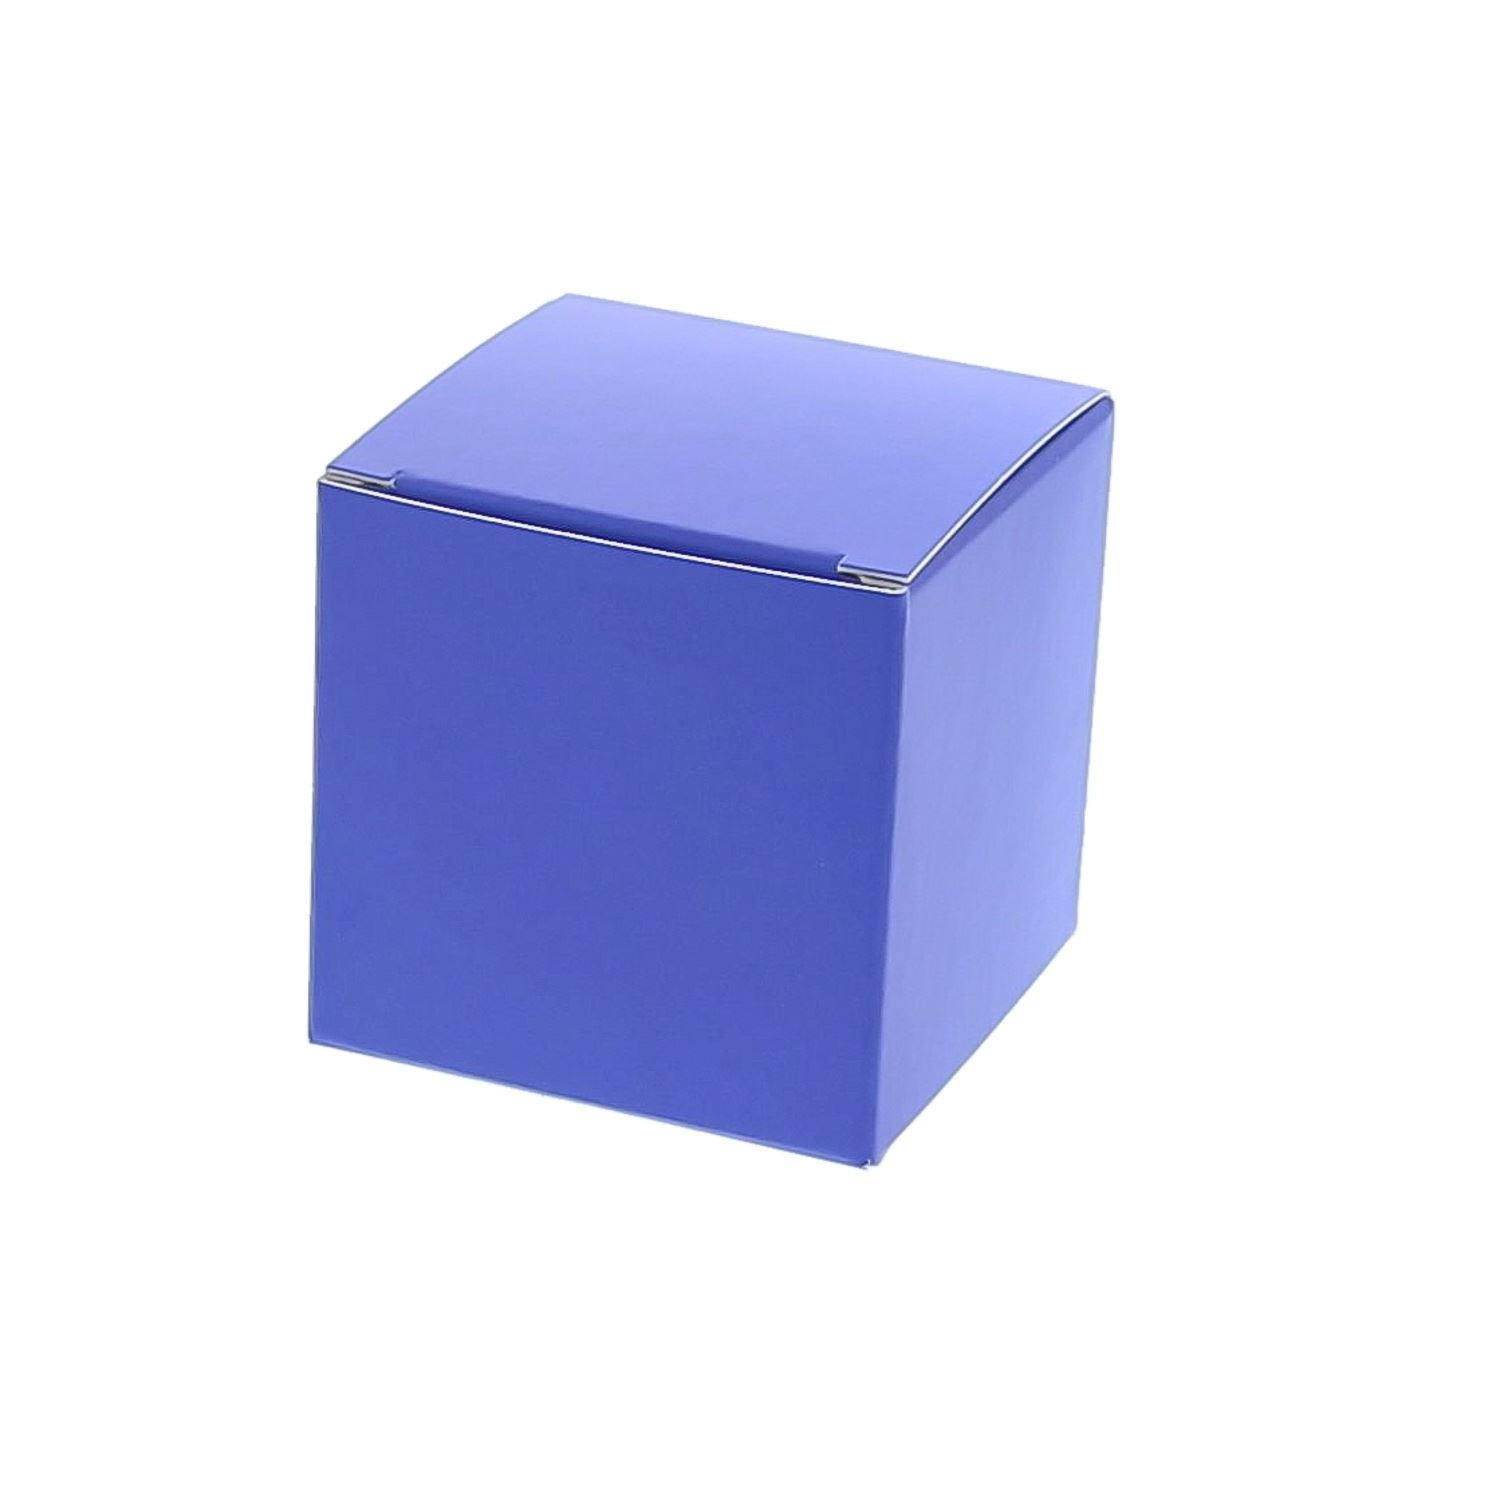 Small cube box blue - 100 pieces